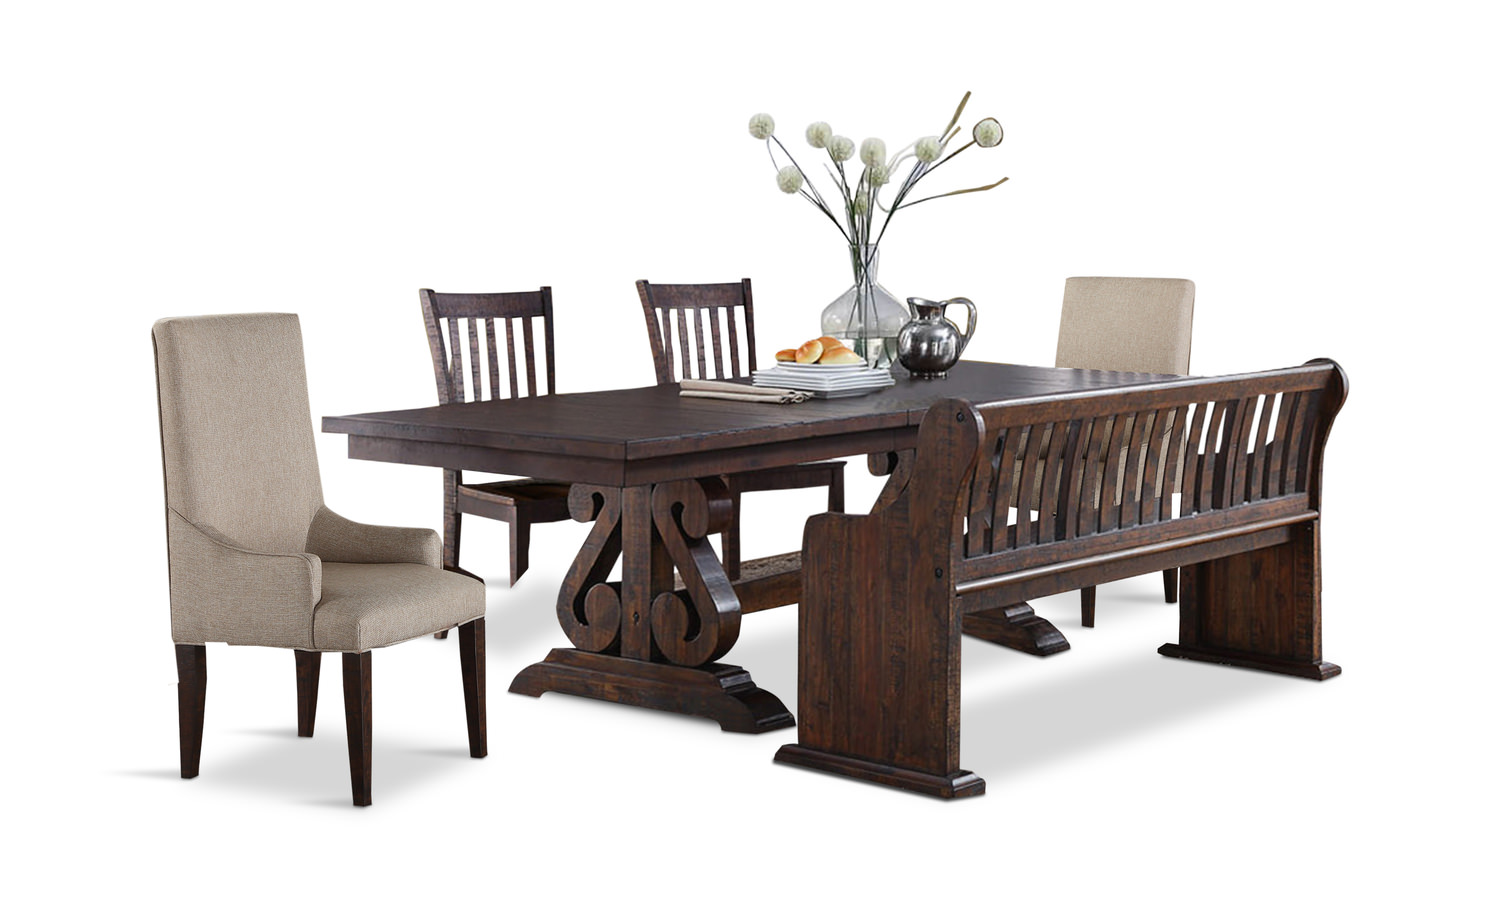 San Juan Table With 4 Side Chairs And 2 Host Chairs Dock86